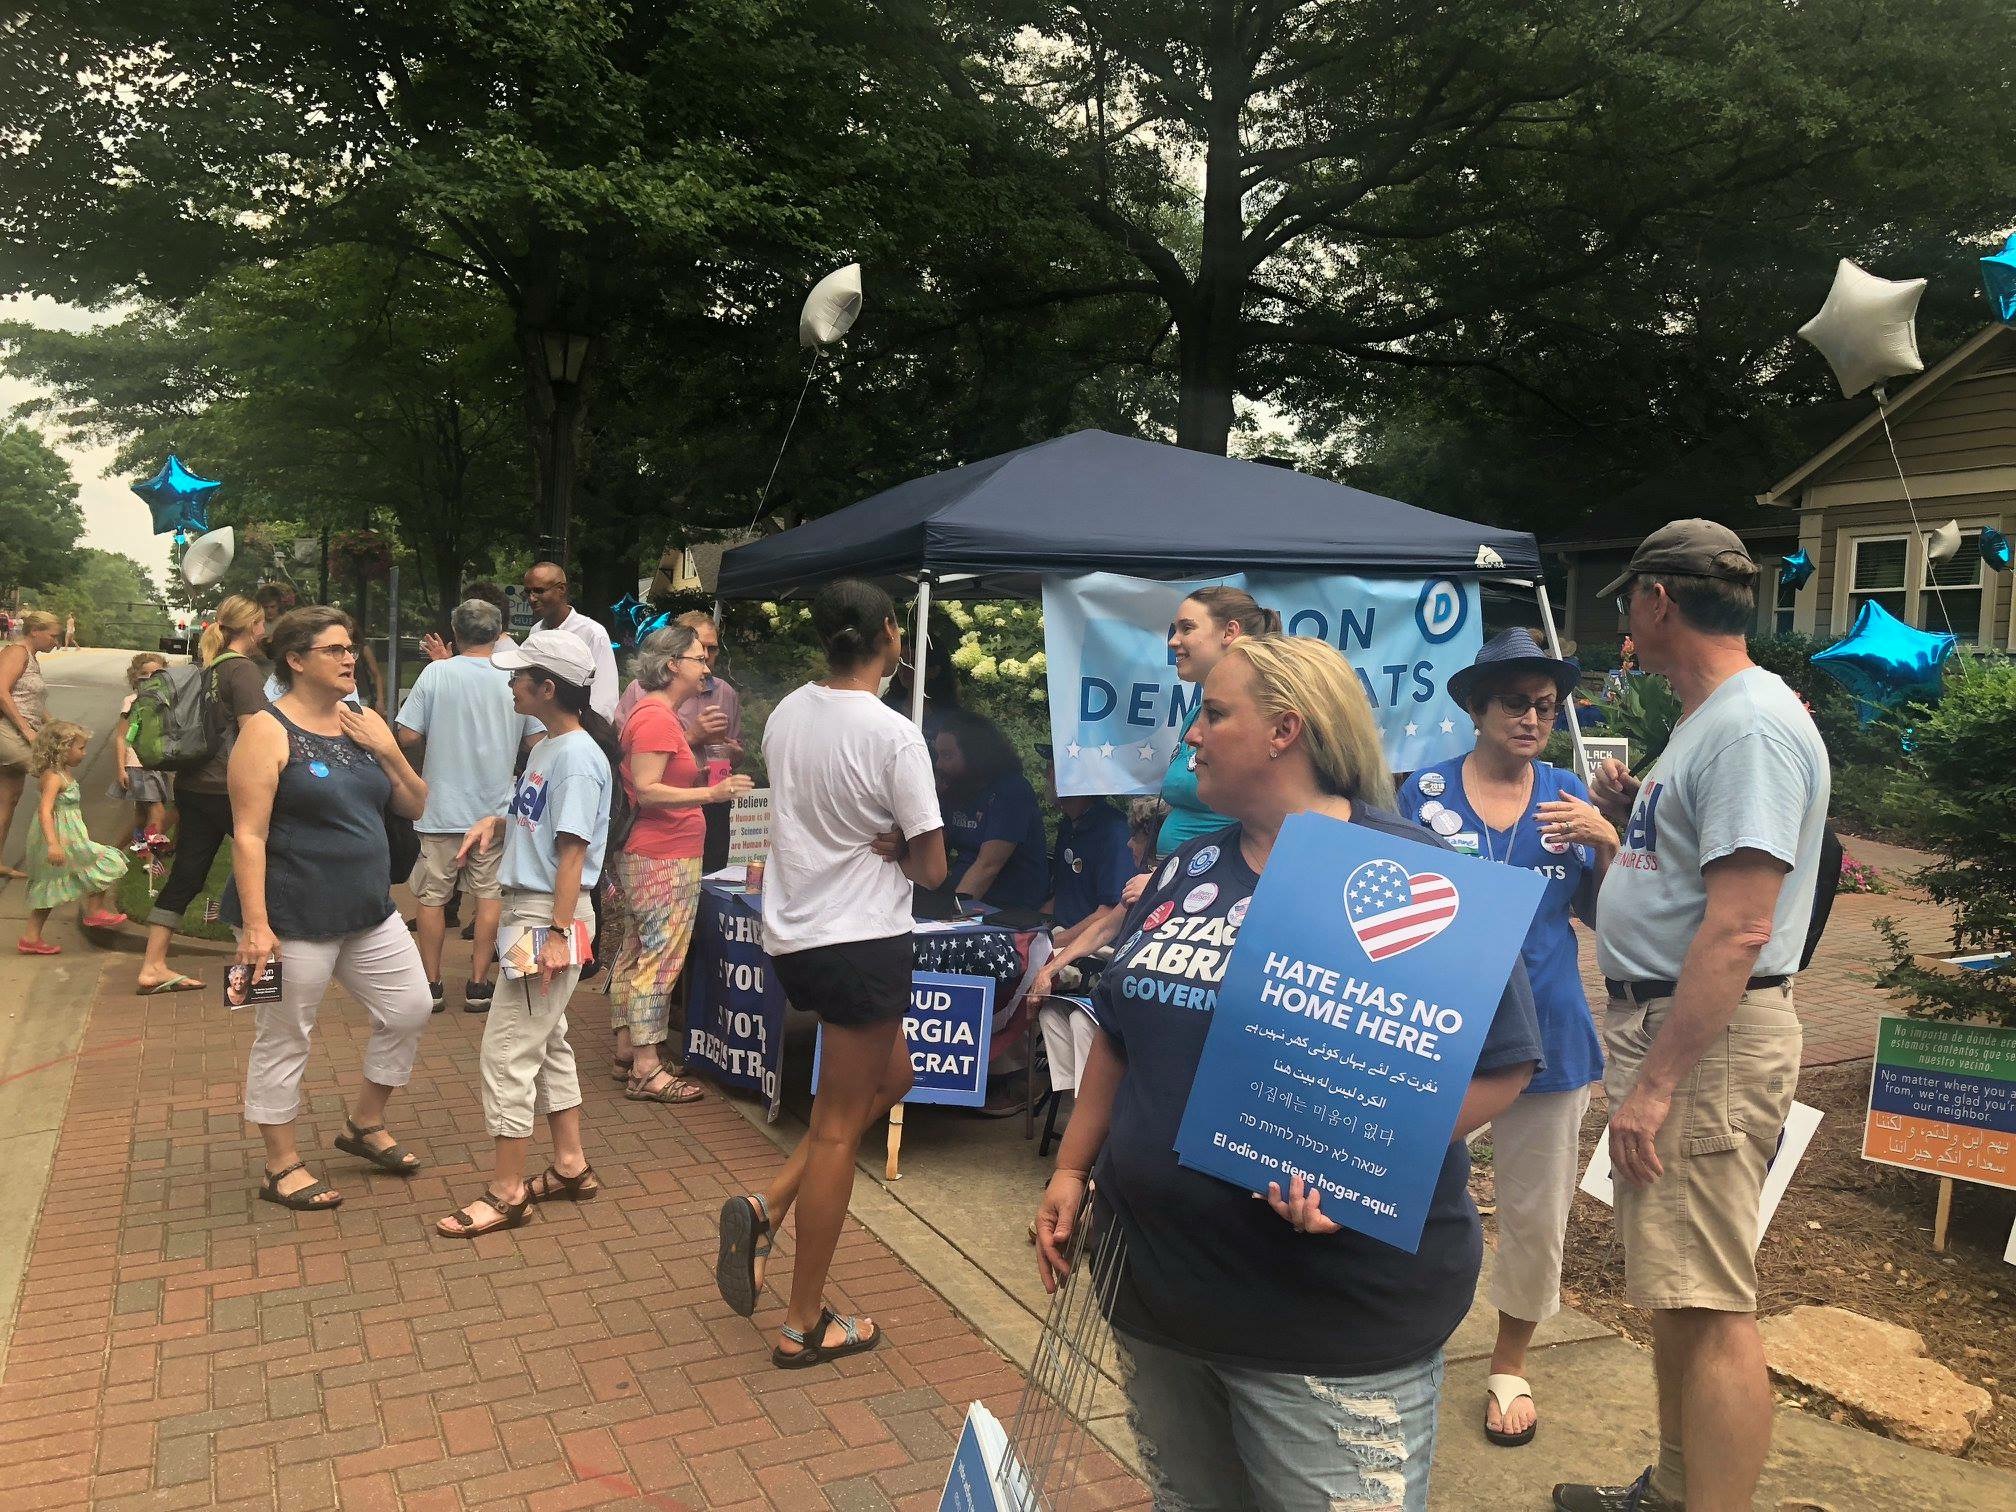 North Fulton Dems at Alive in Roswell event